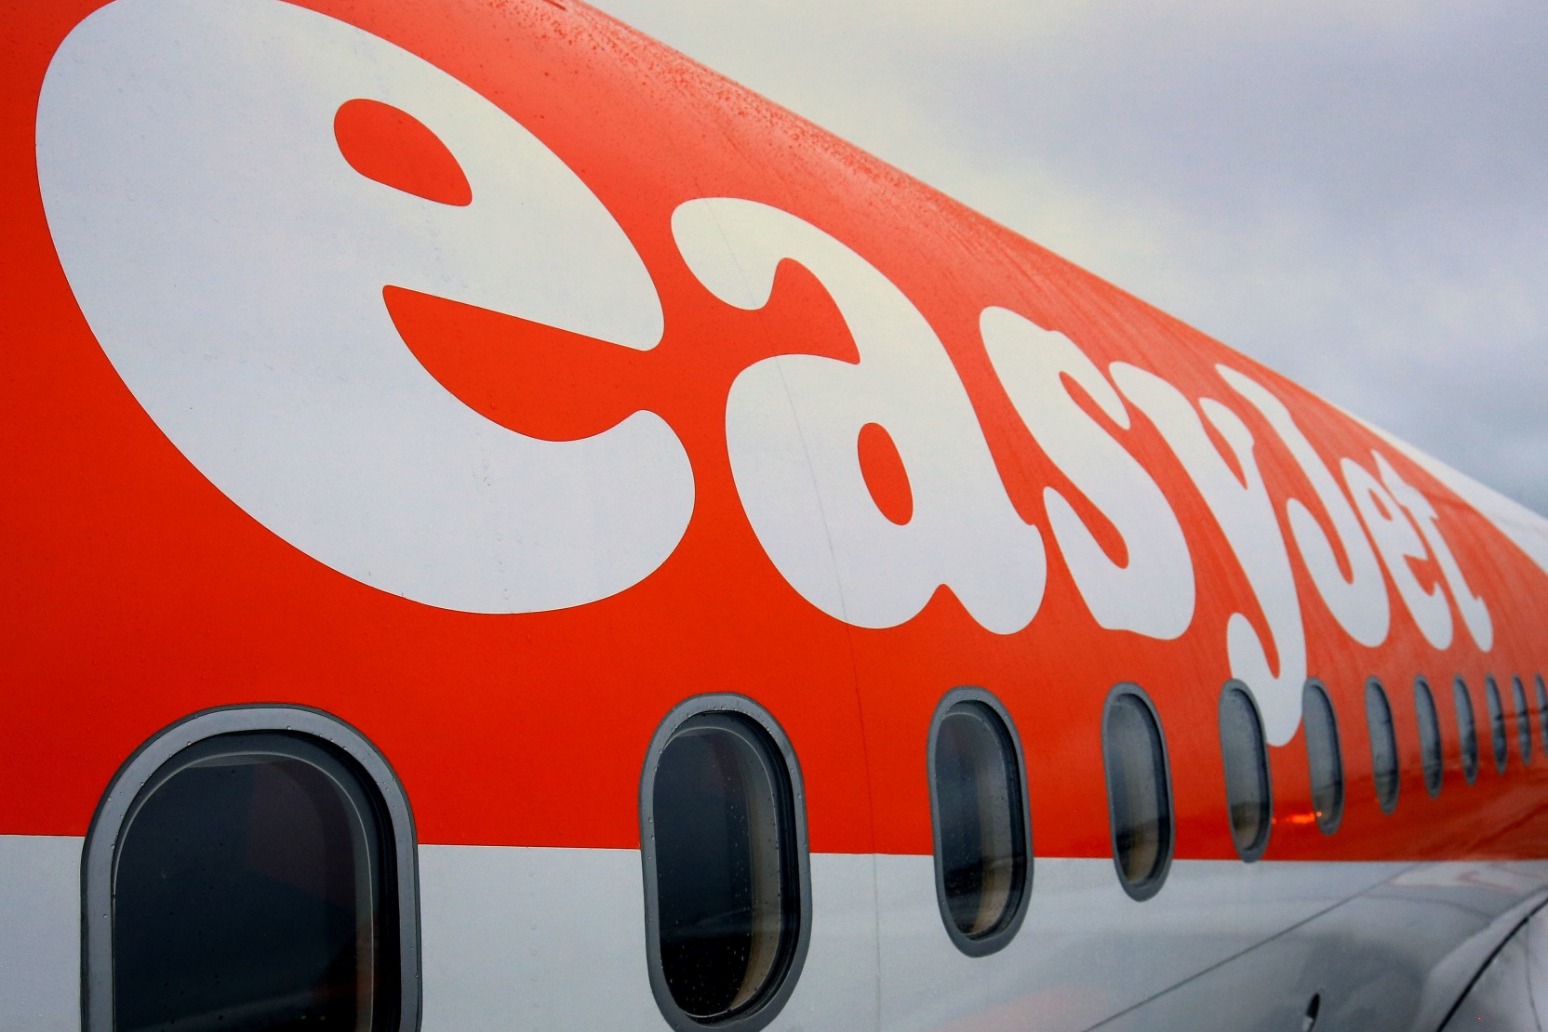 EASYJET WILL FLY TO TUNISIA FOR FIRST TIME SINCE 2015 SOUSSE ATTACK 